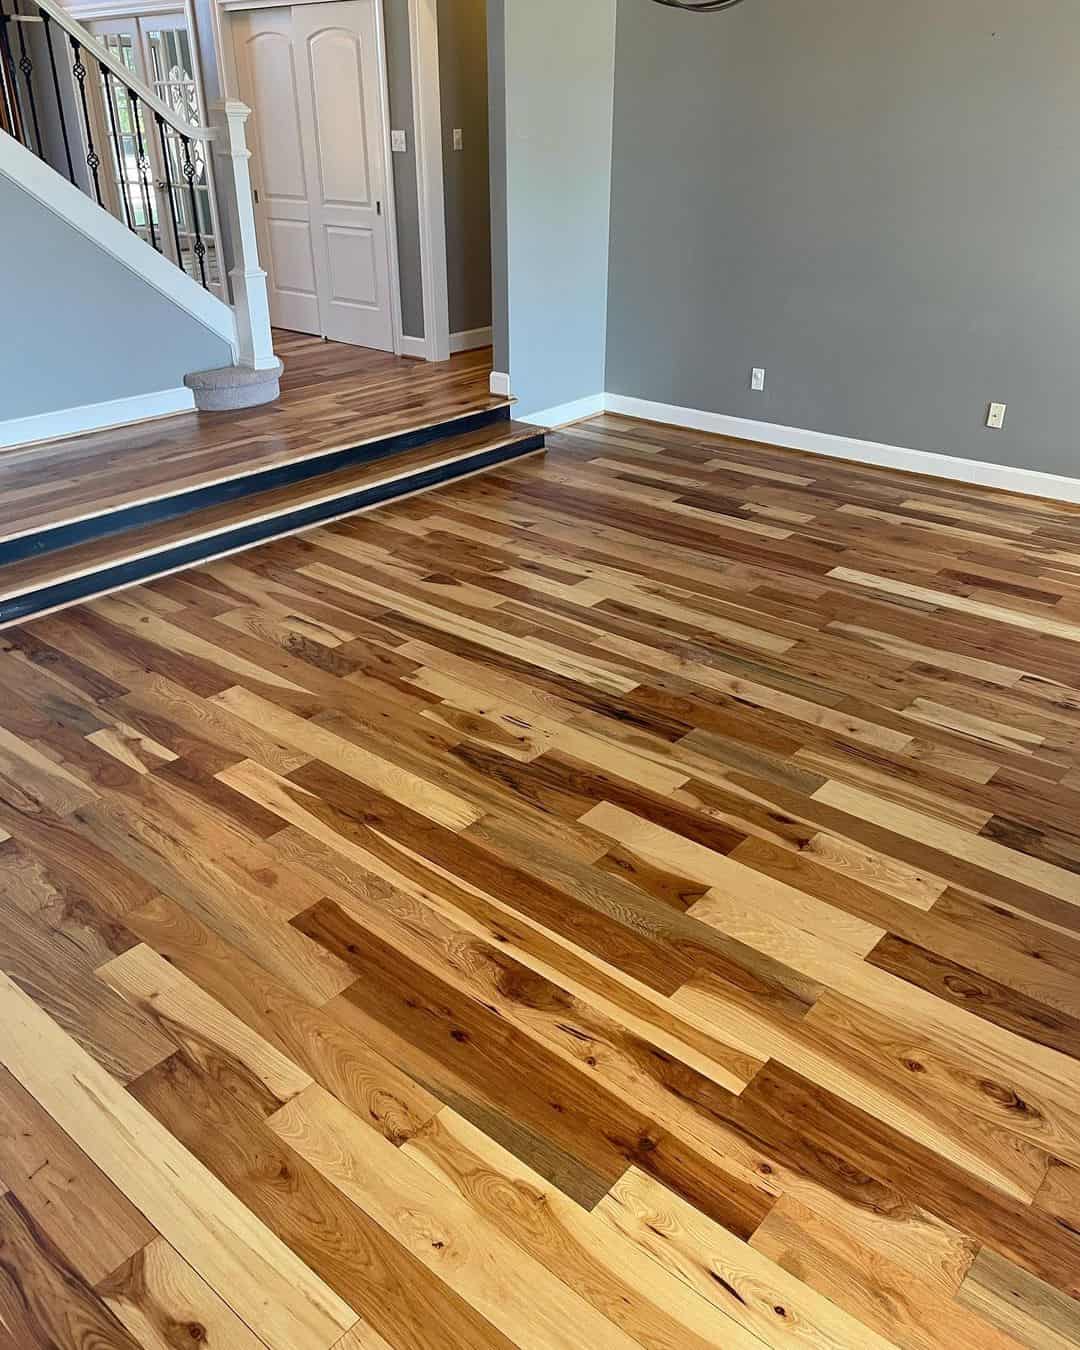 What are the pros and cons of hickory flooring